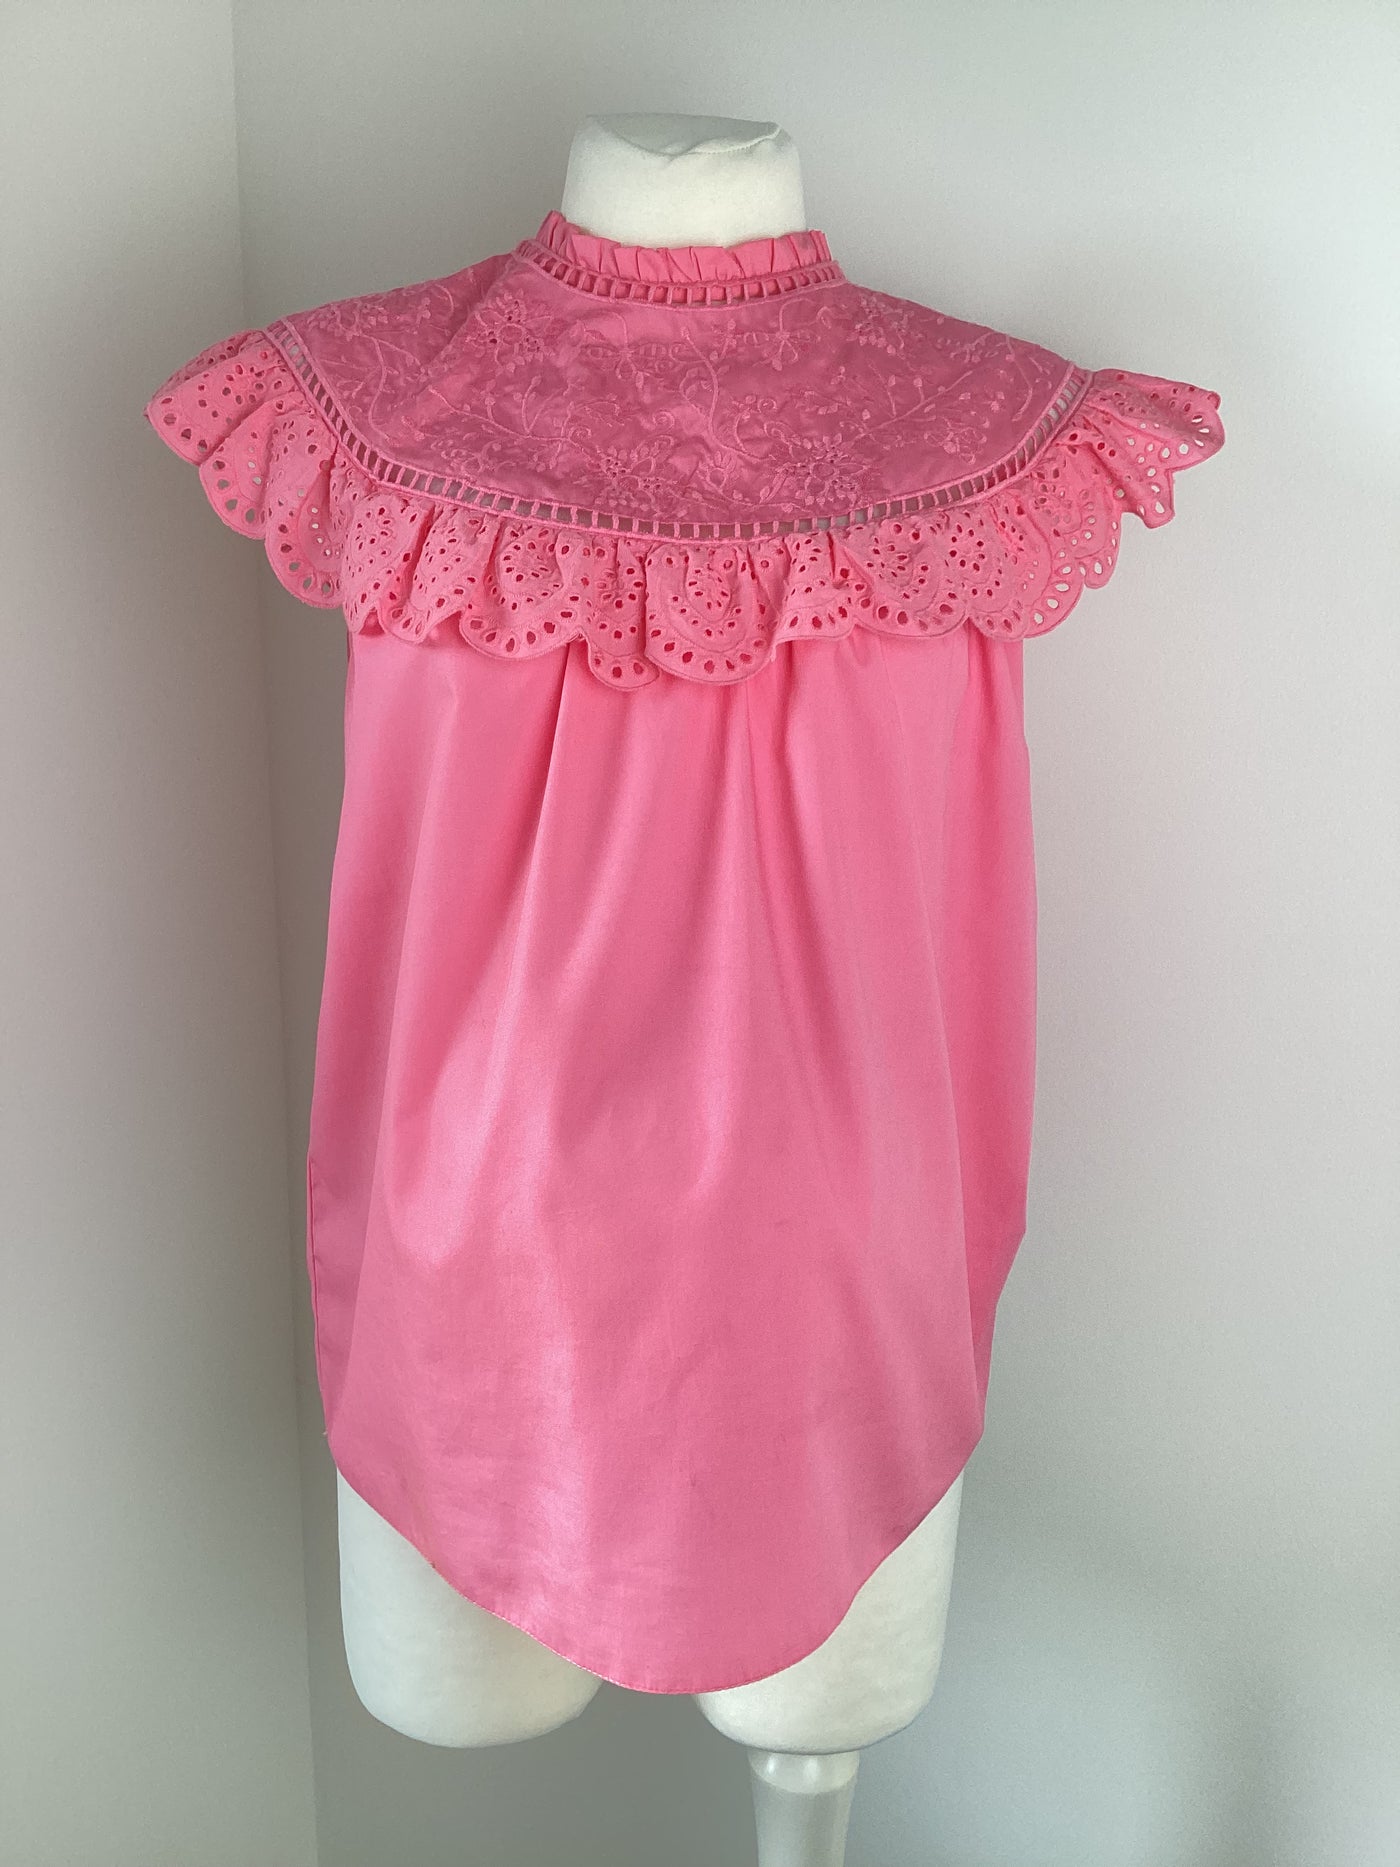 New Look Maternity pink cap sleeved top with neckline detail - Size 12